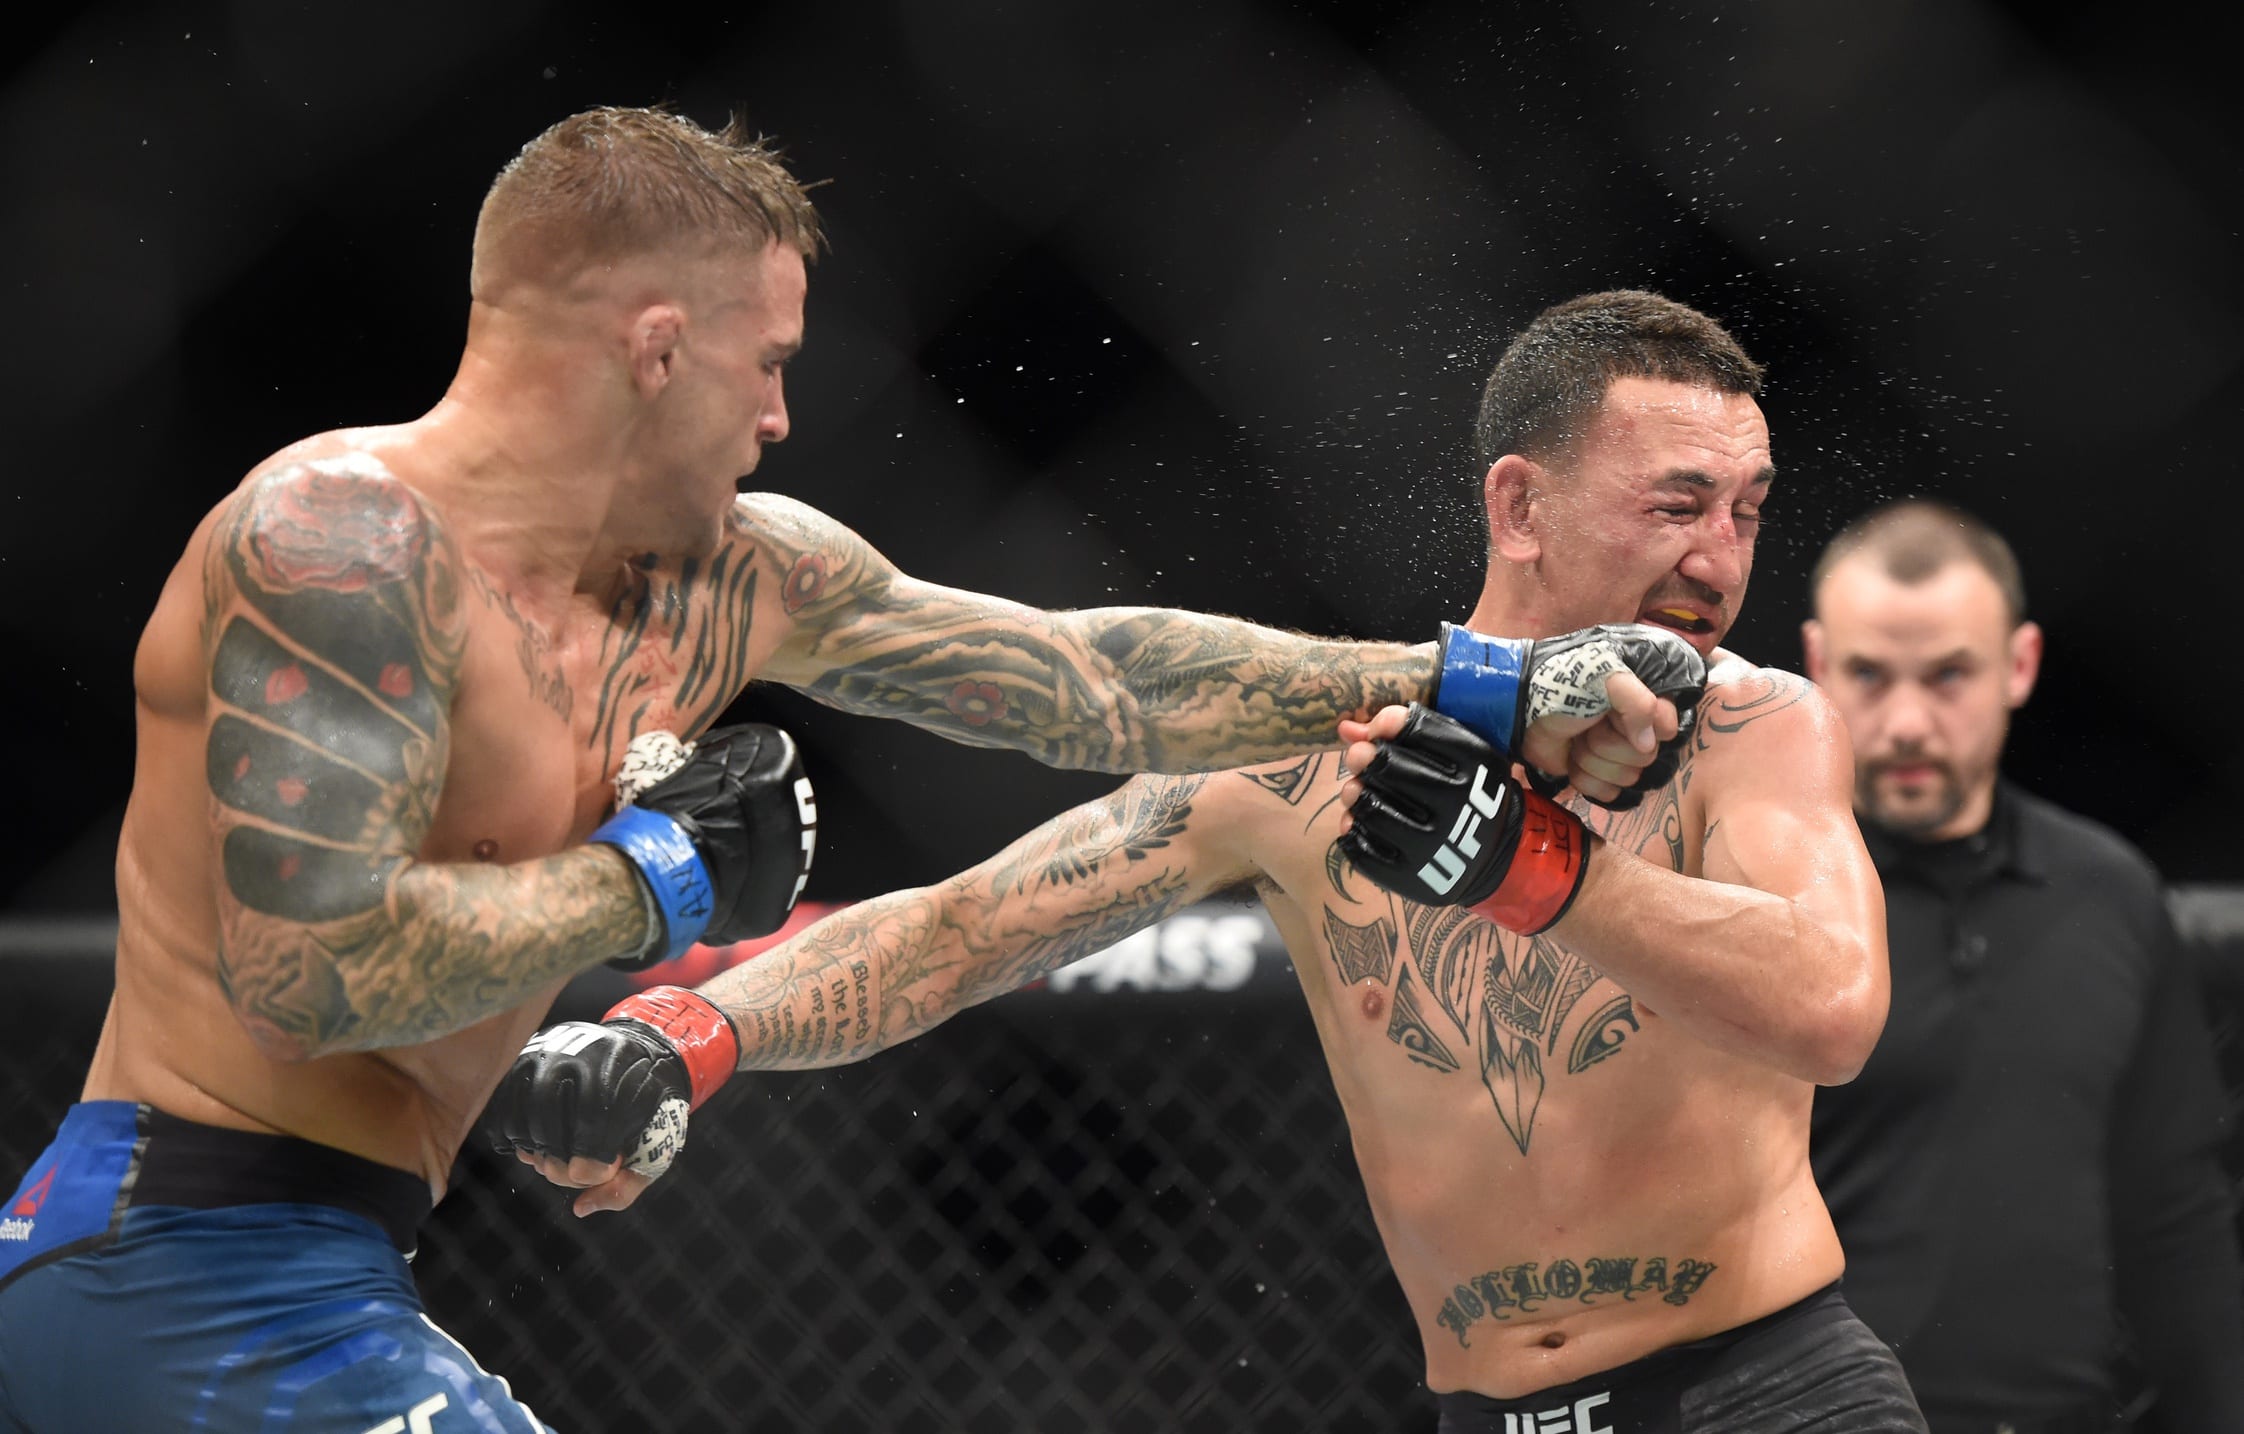 Free Fight Watch Dustin Poirier Outpoint Max Holloway In UFC 236 Classic